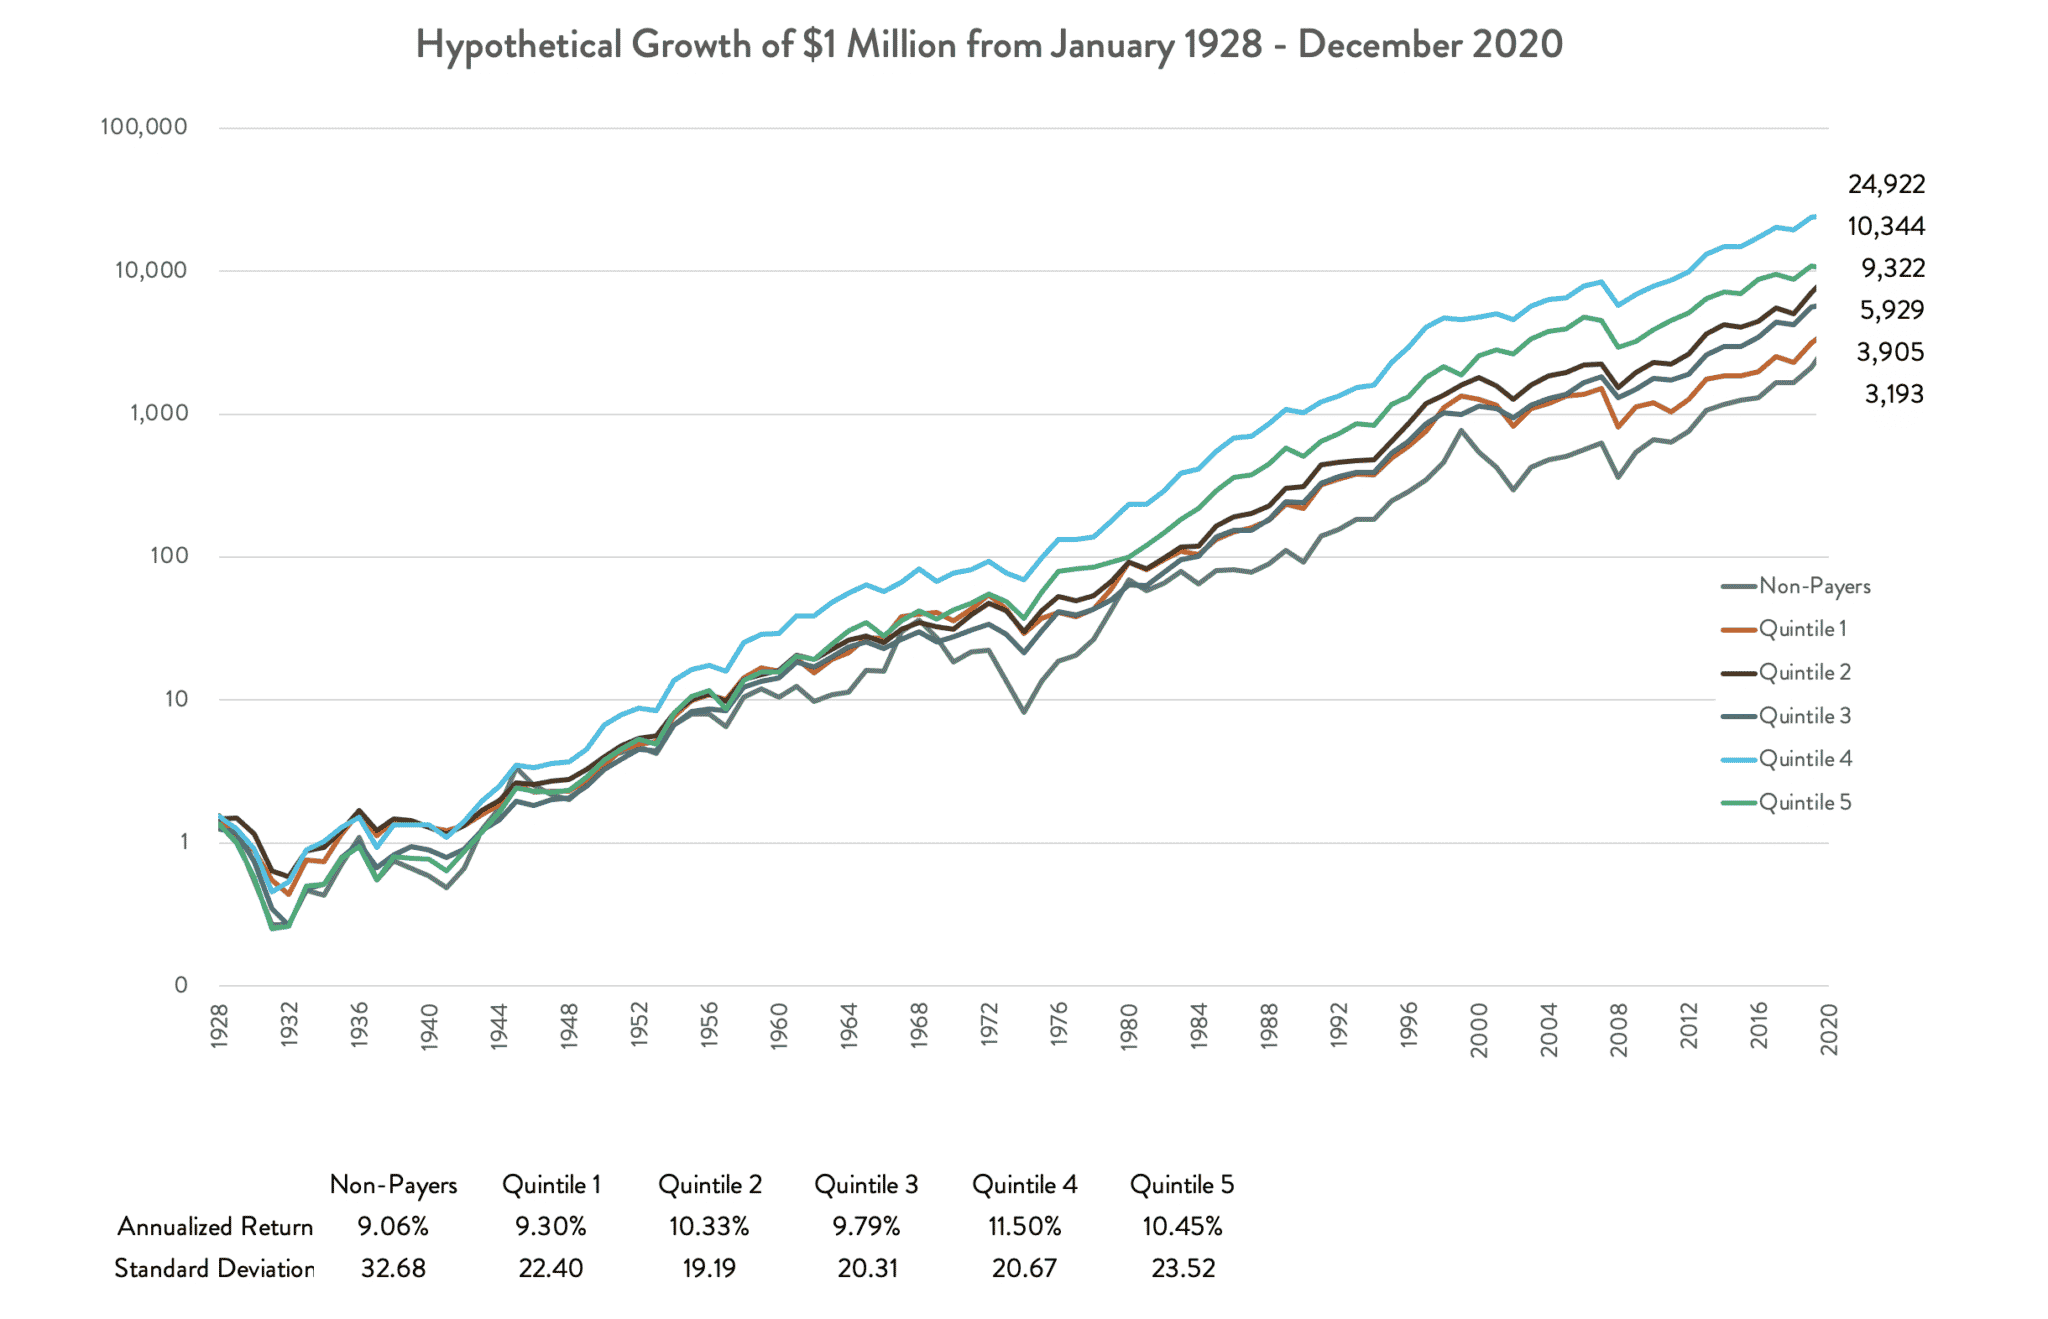 Hypothetical Growth of 1 Million from January 1928 - December 2020